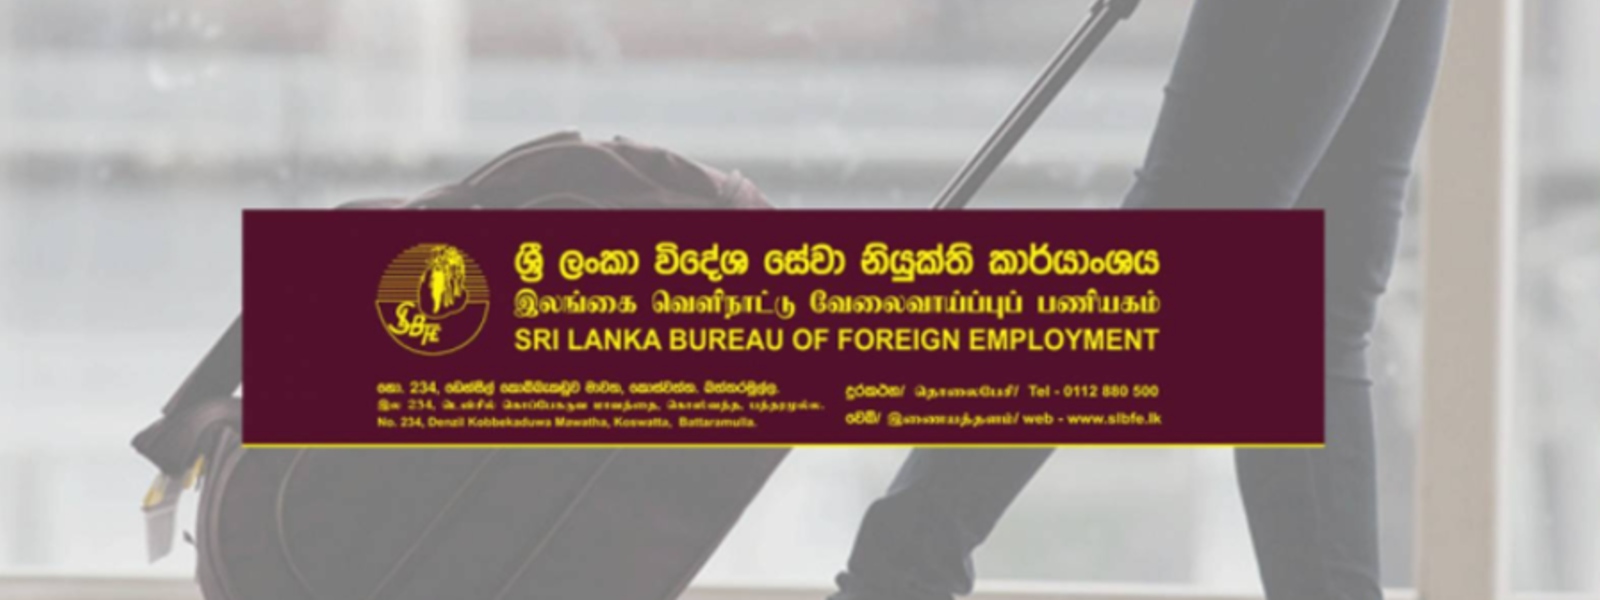 SLBFE introduces new procedure for migrant workers who lost employment